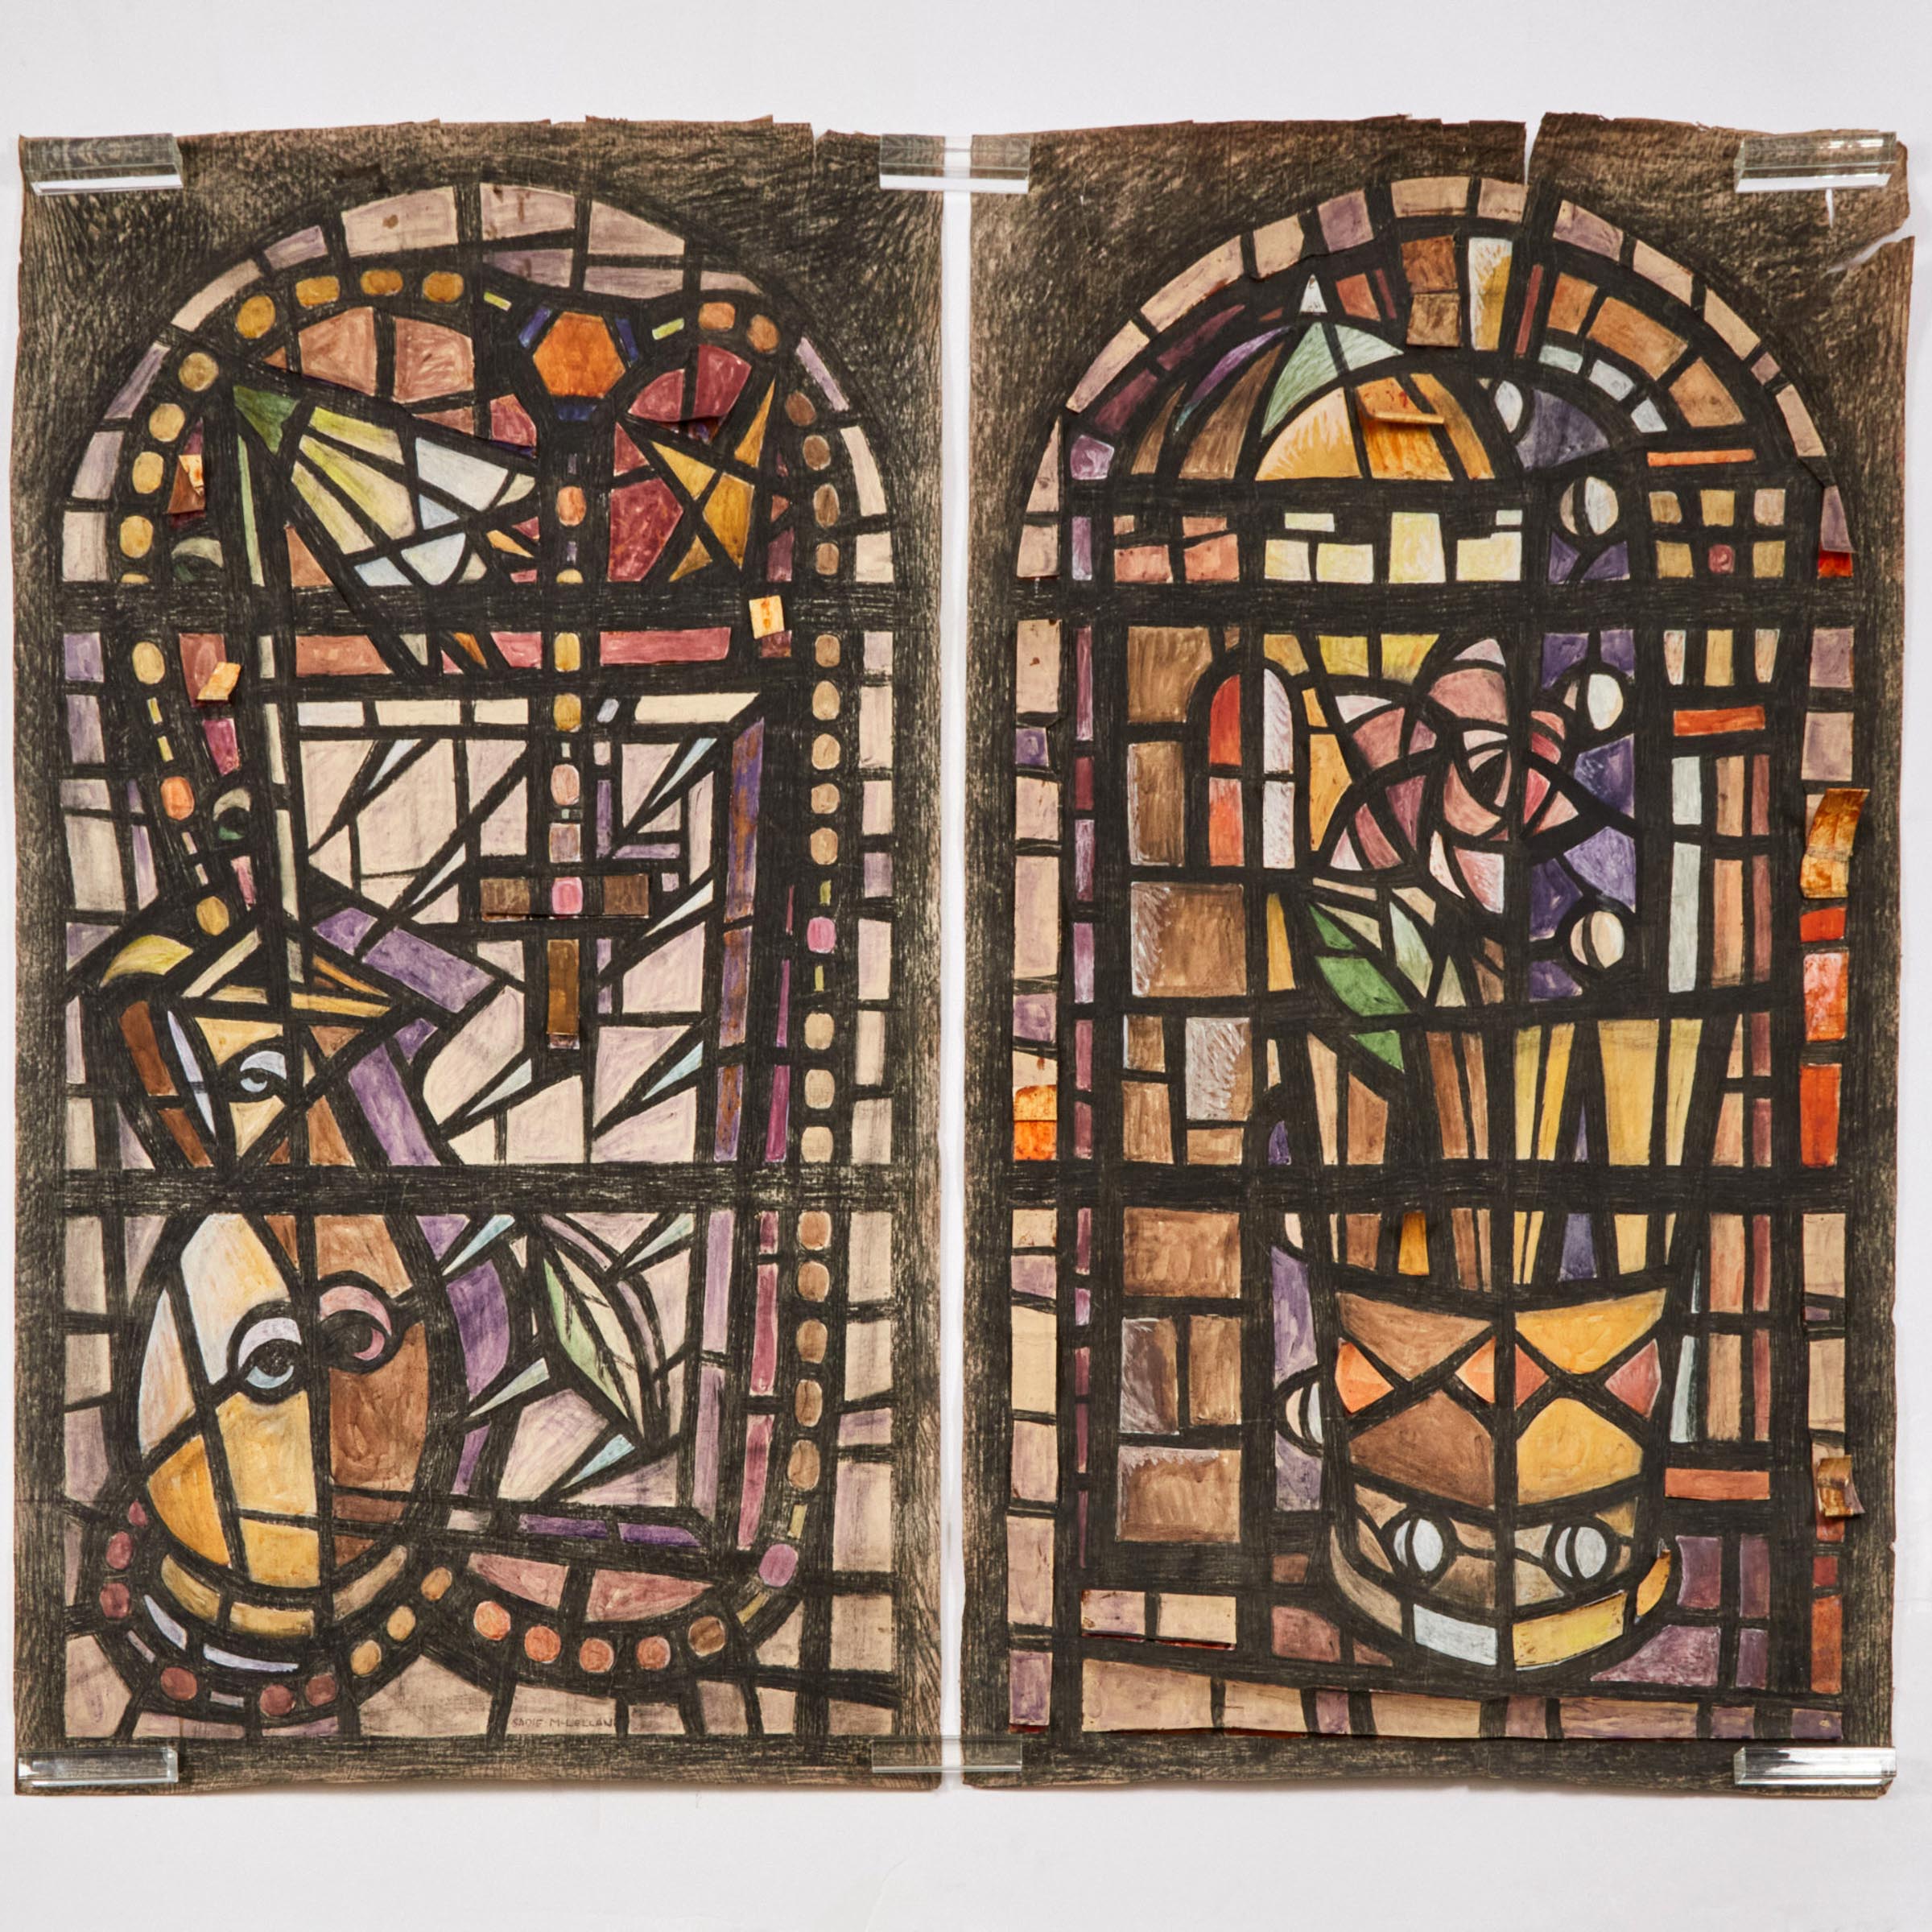 Archive of Stained Glass Window